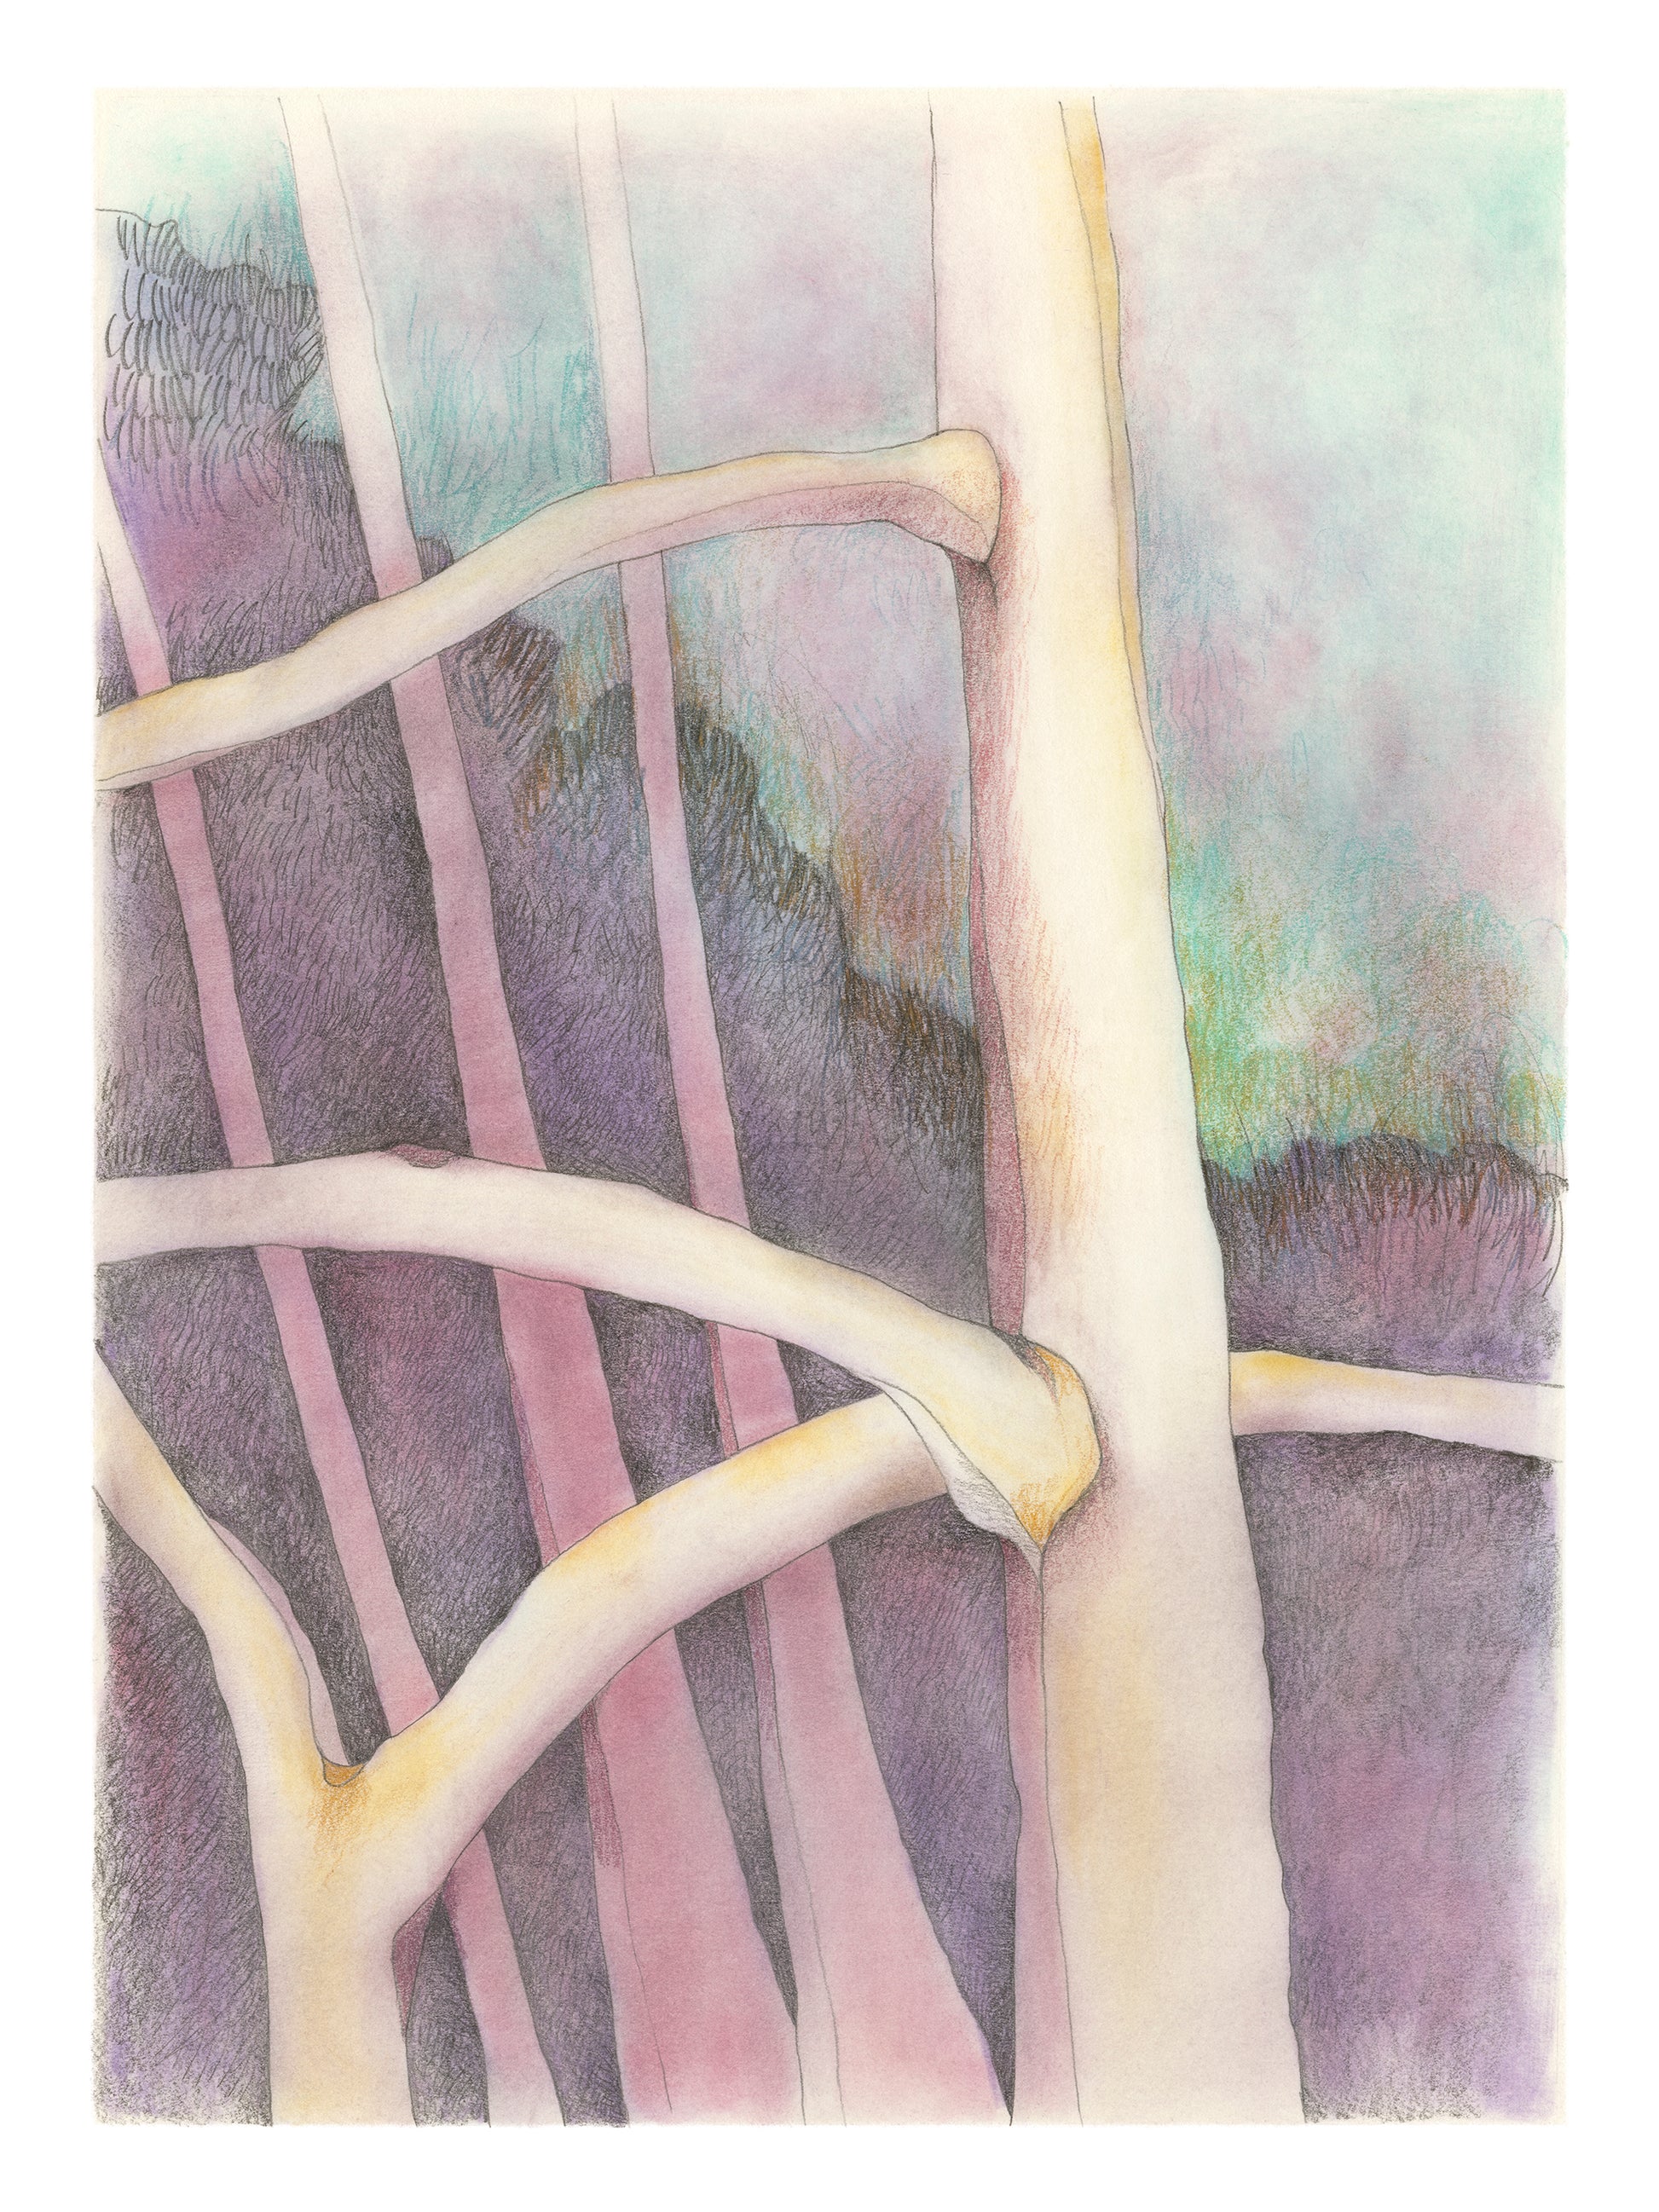 Drawing of trees against a dreamlike background.